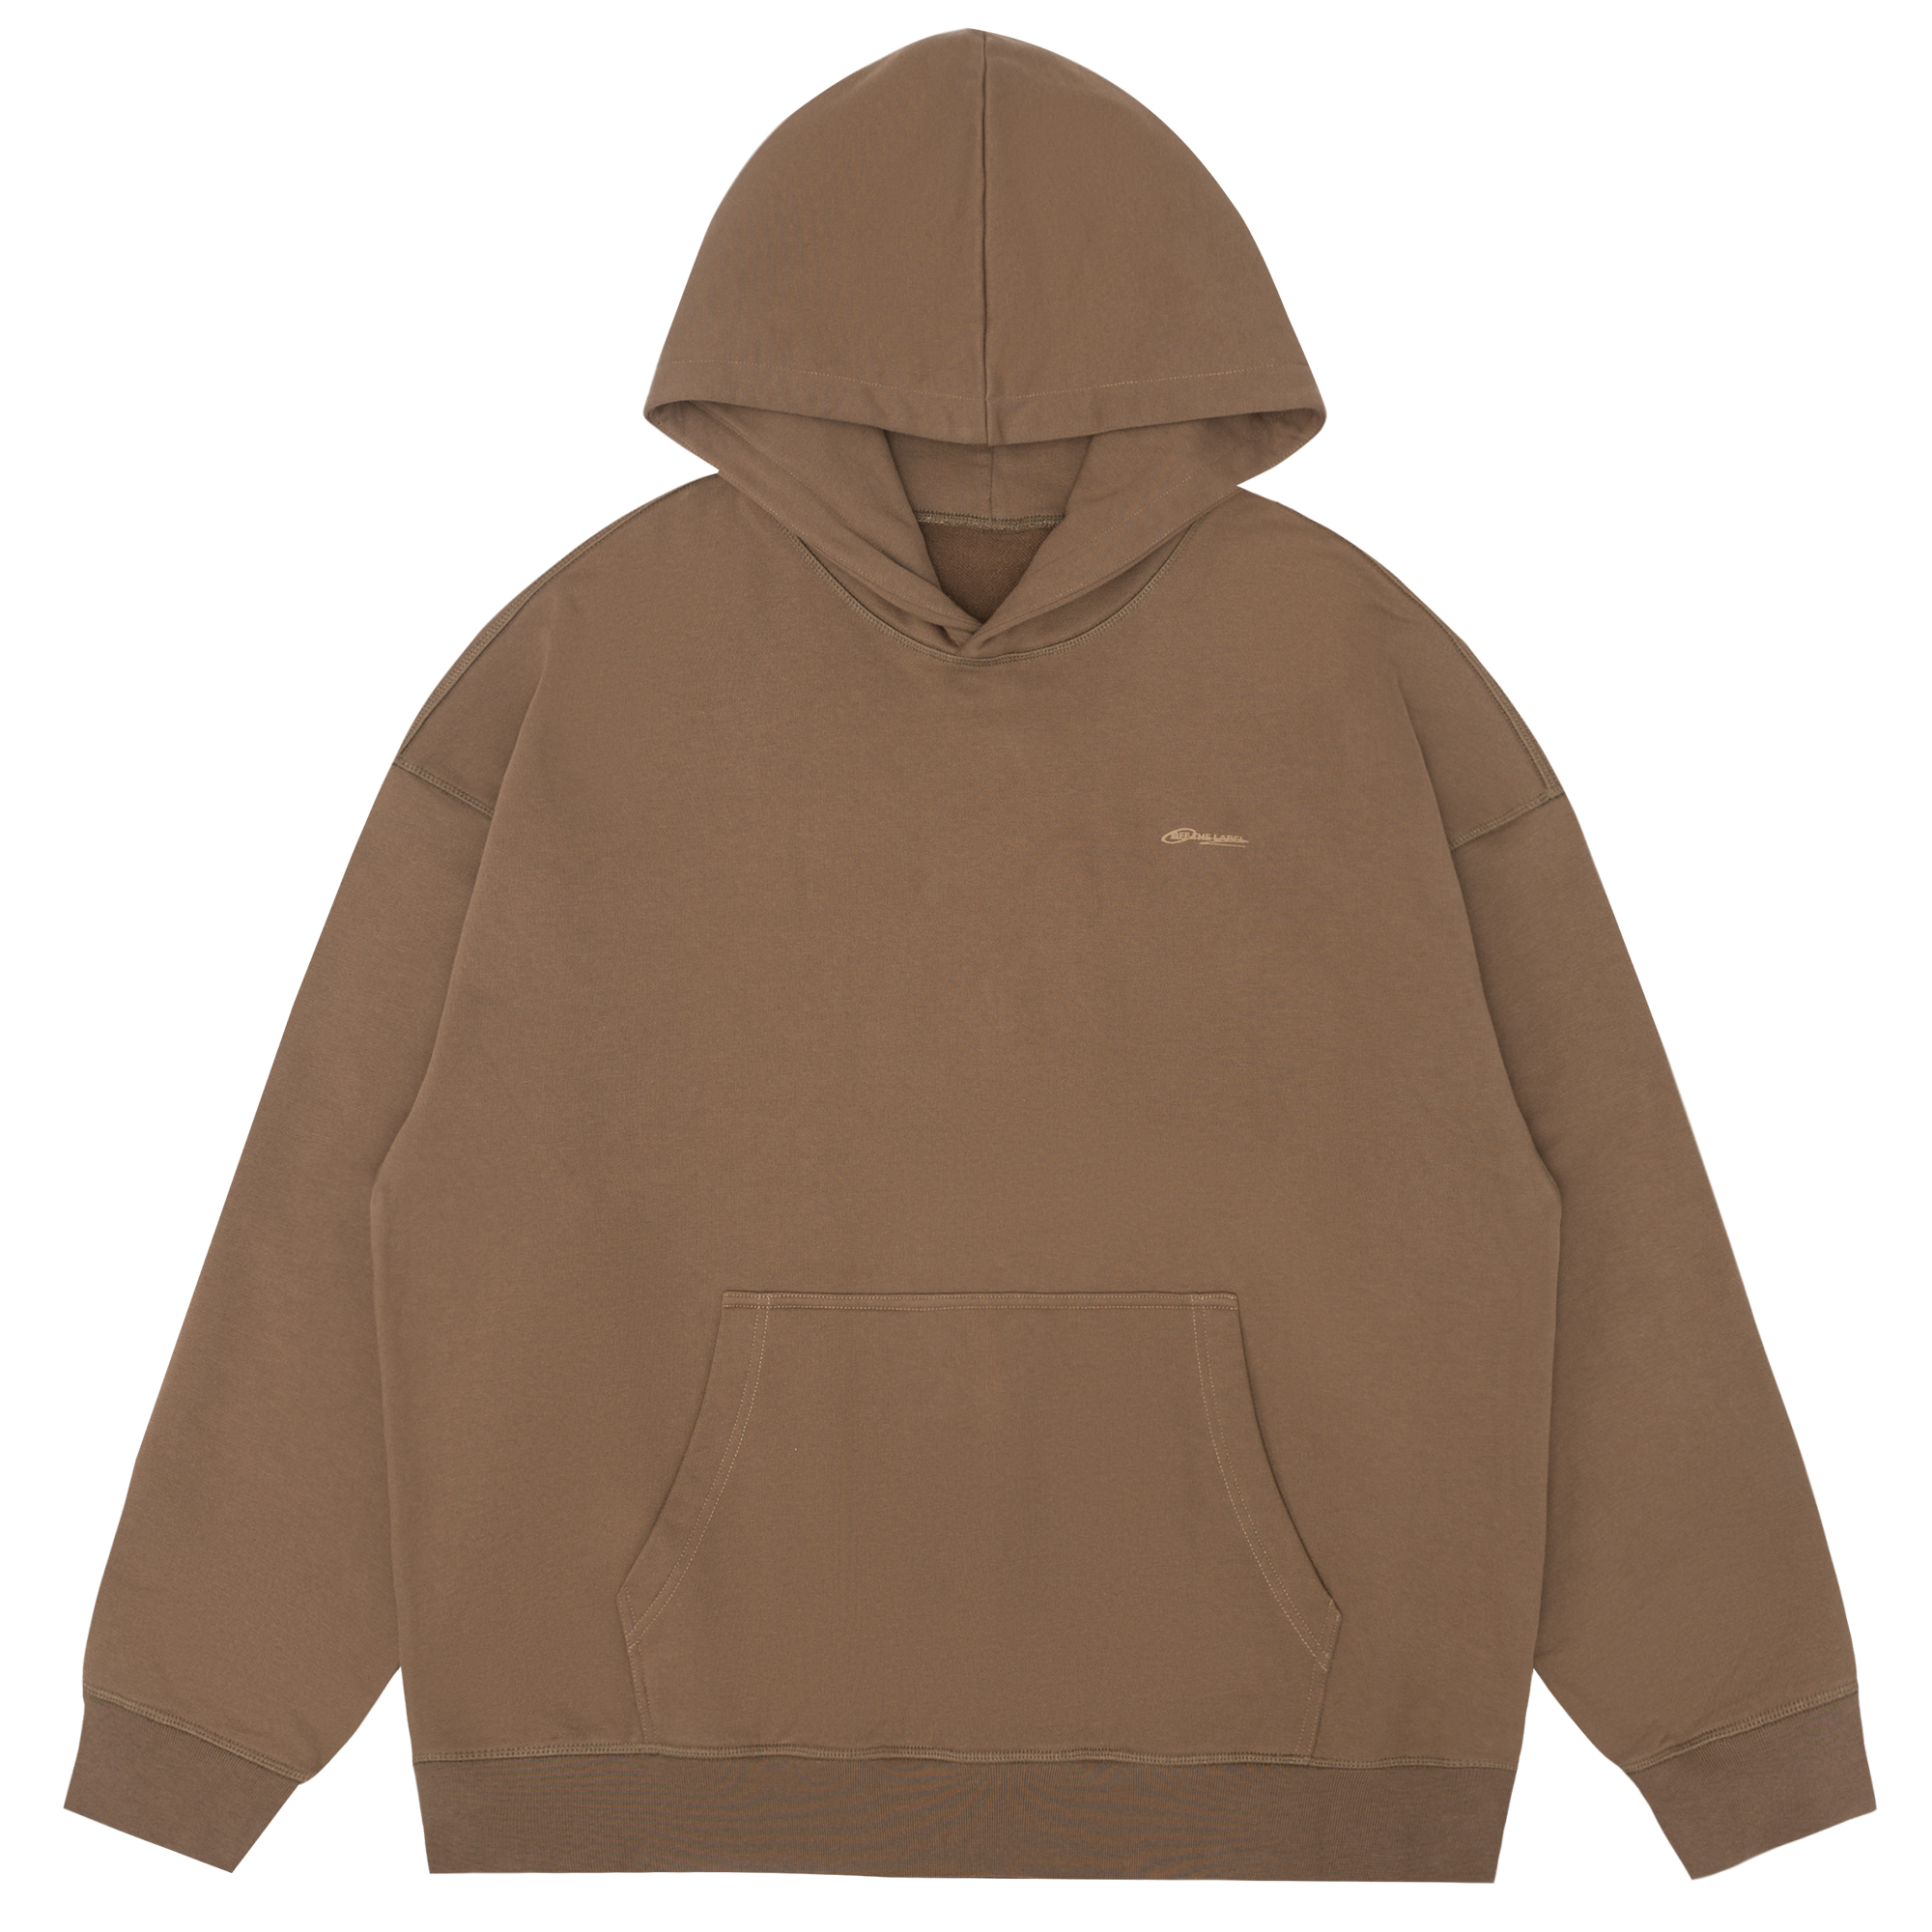 [Welcome Special] Off The Label brown reversible hoodie